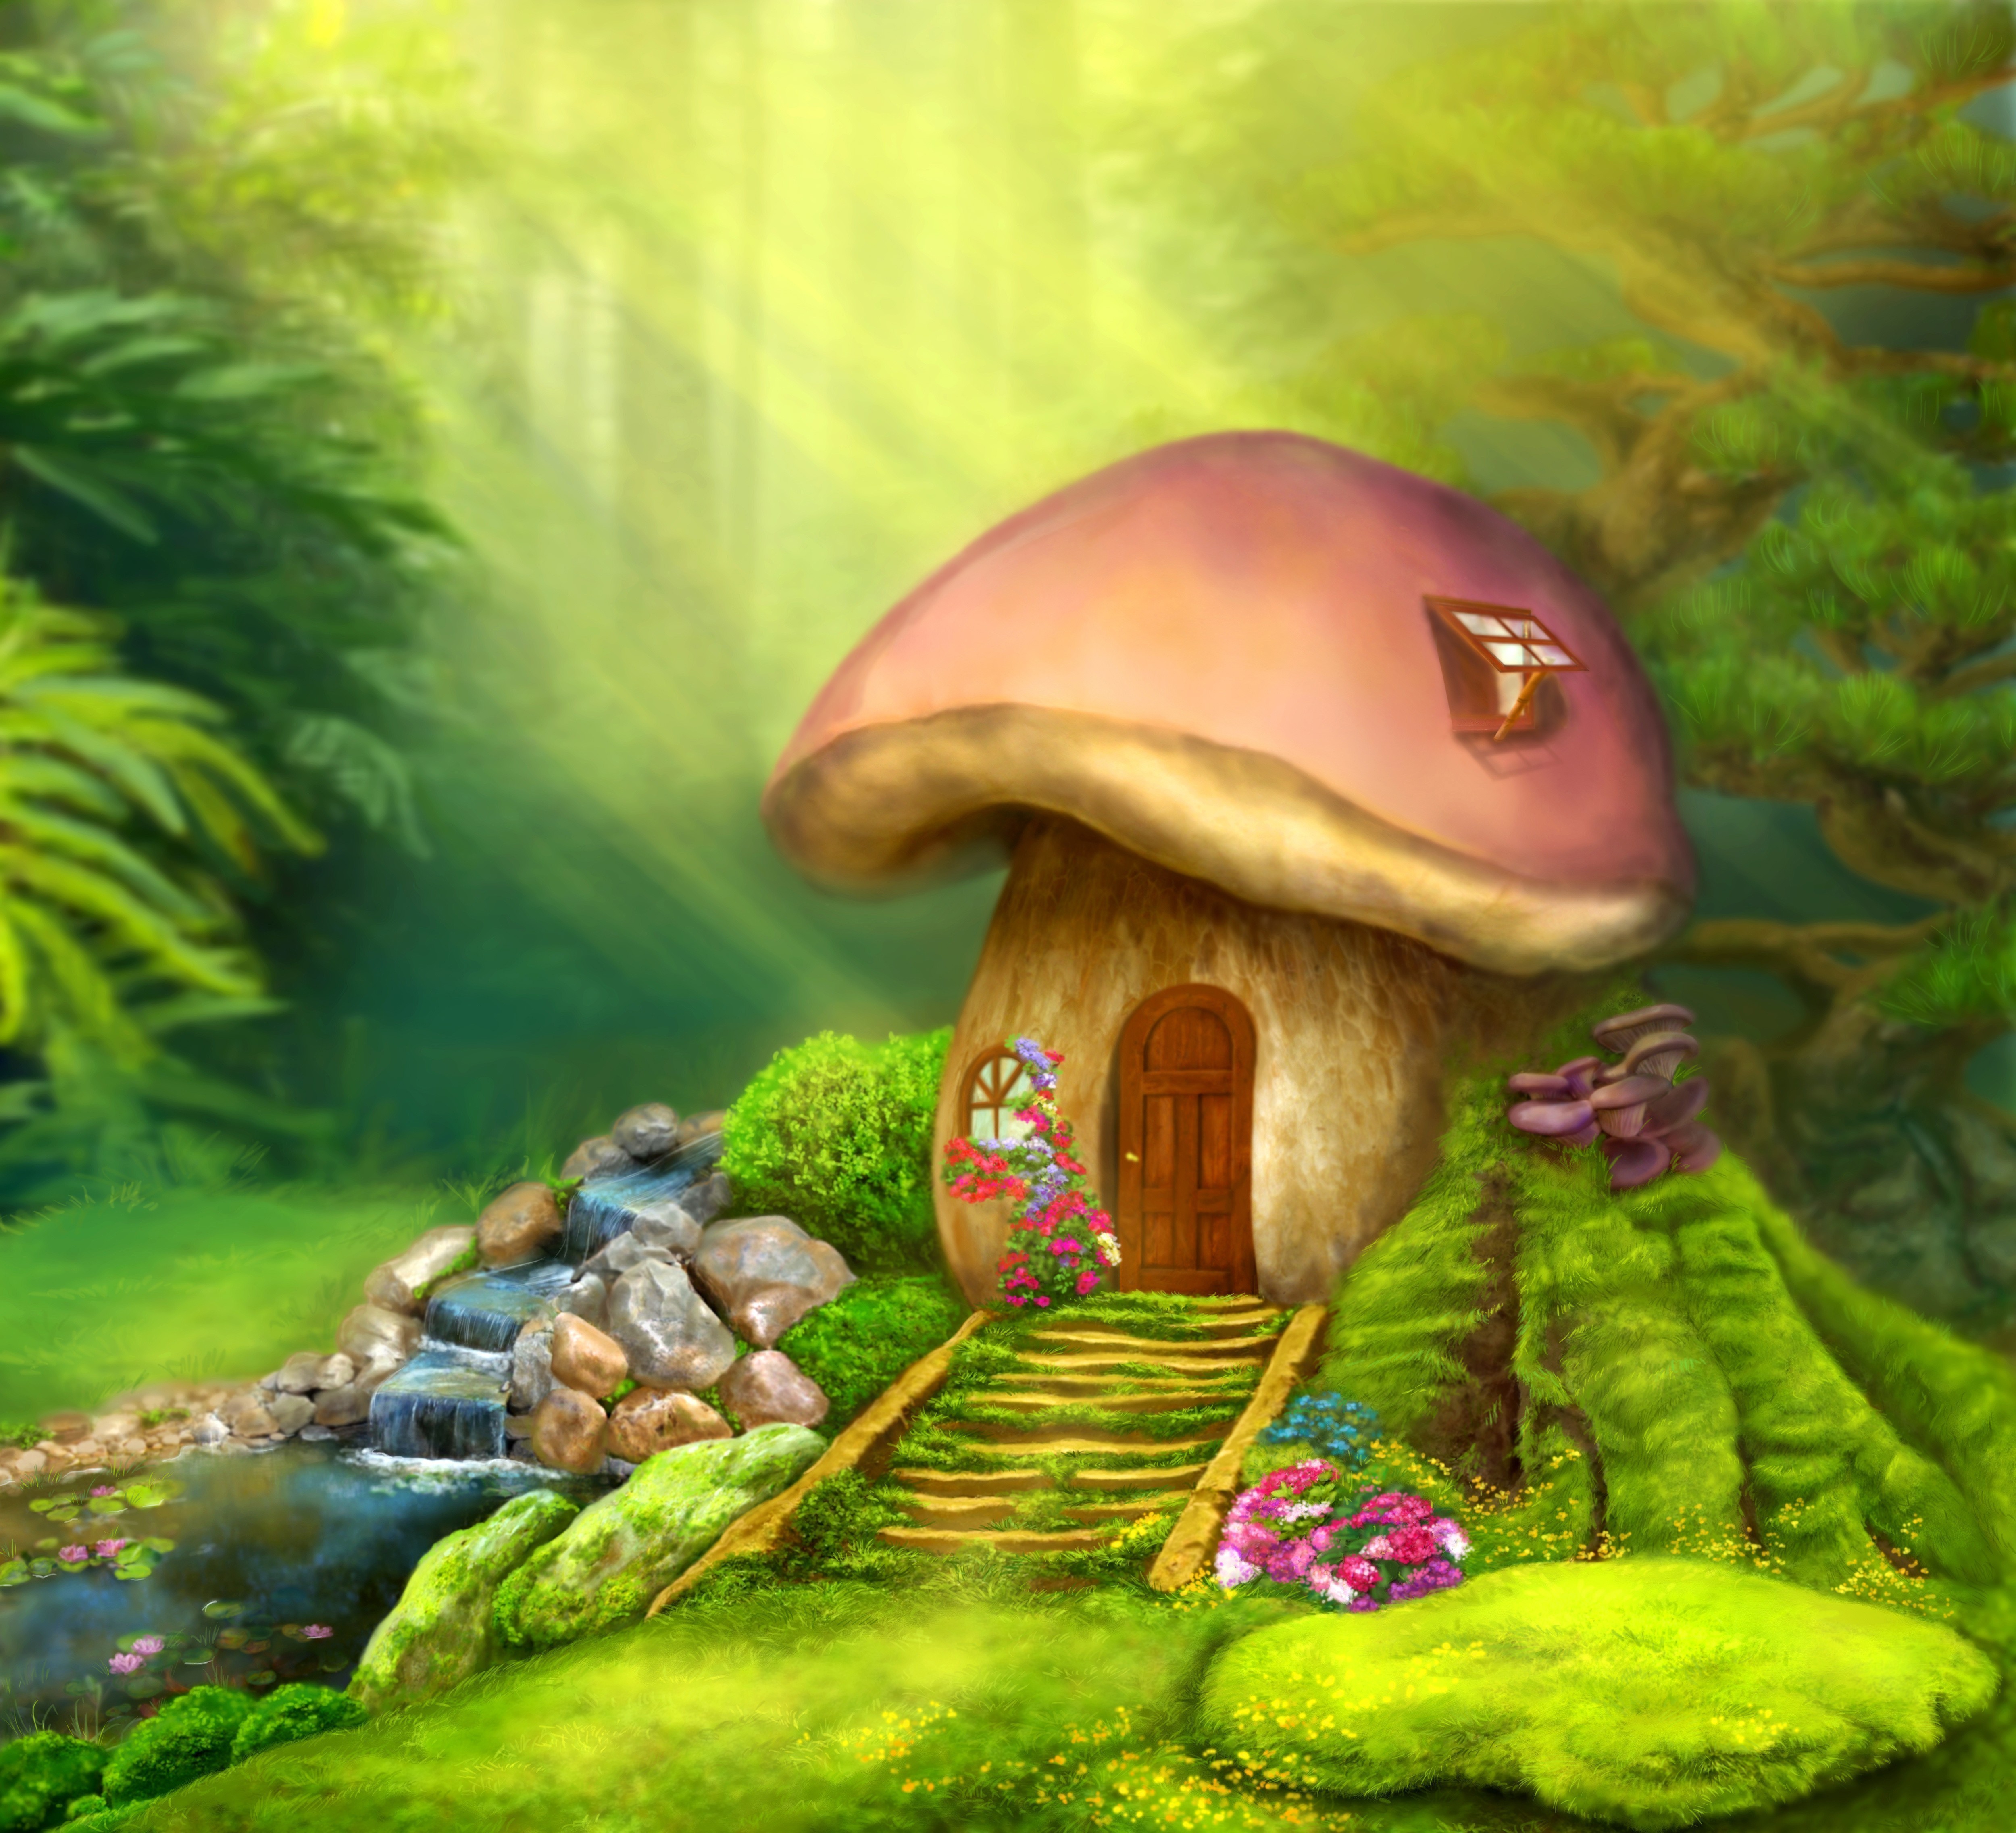 Fantasy mushroom cottage on a colorful meadow - Fantasy - Categories ...